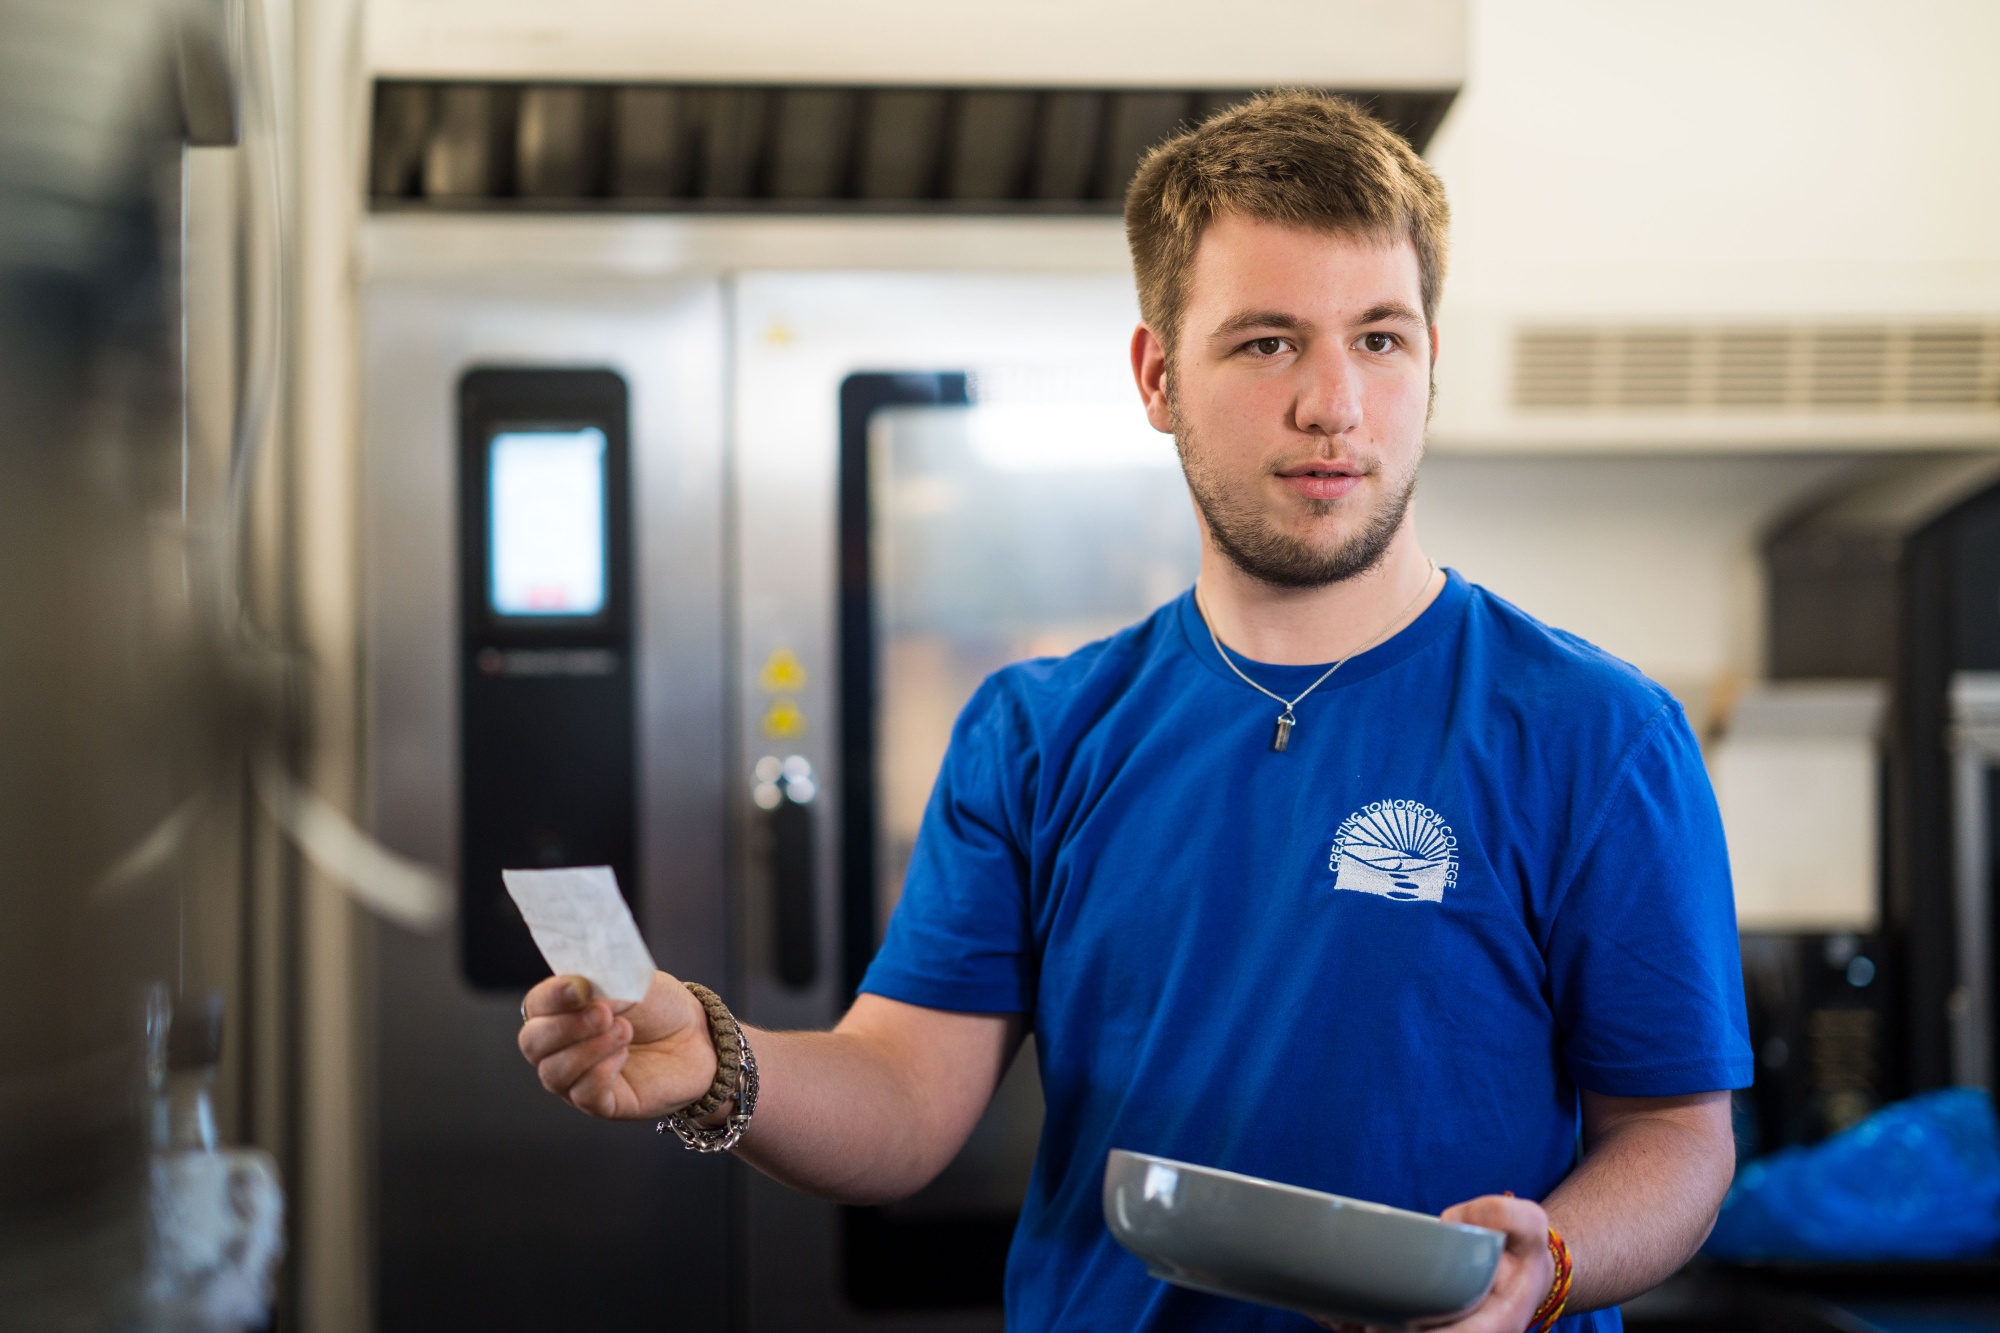 Photo of a student on a work placement in a kitchen, taking a food order.